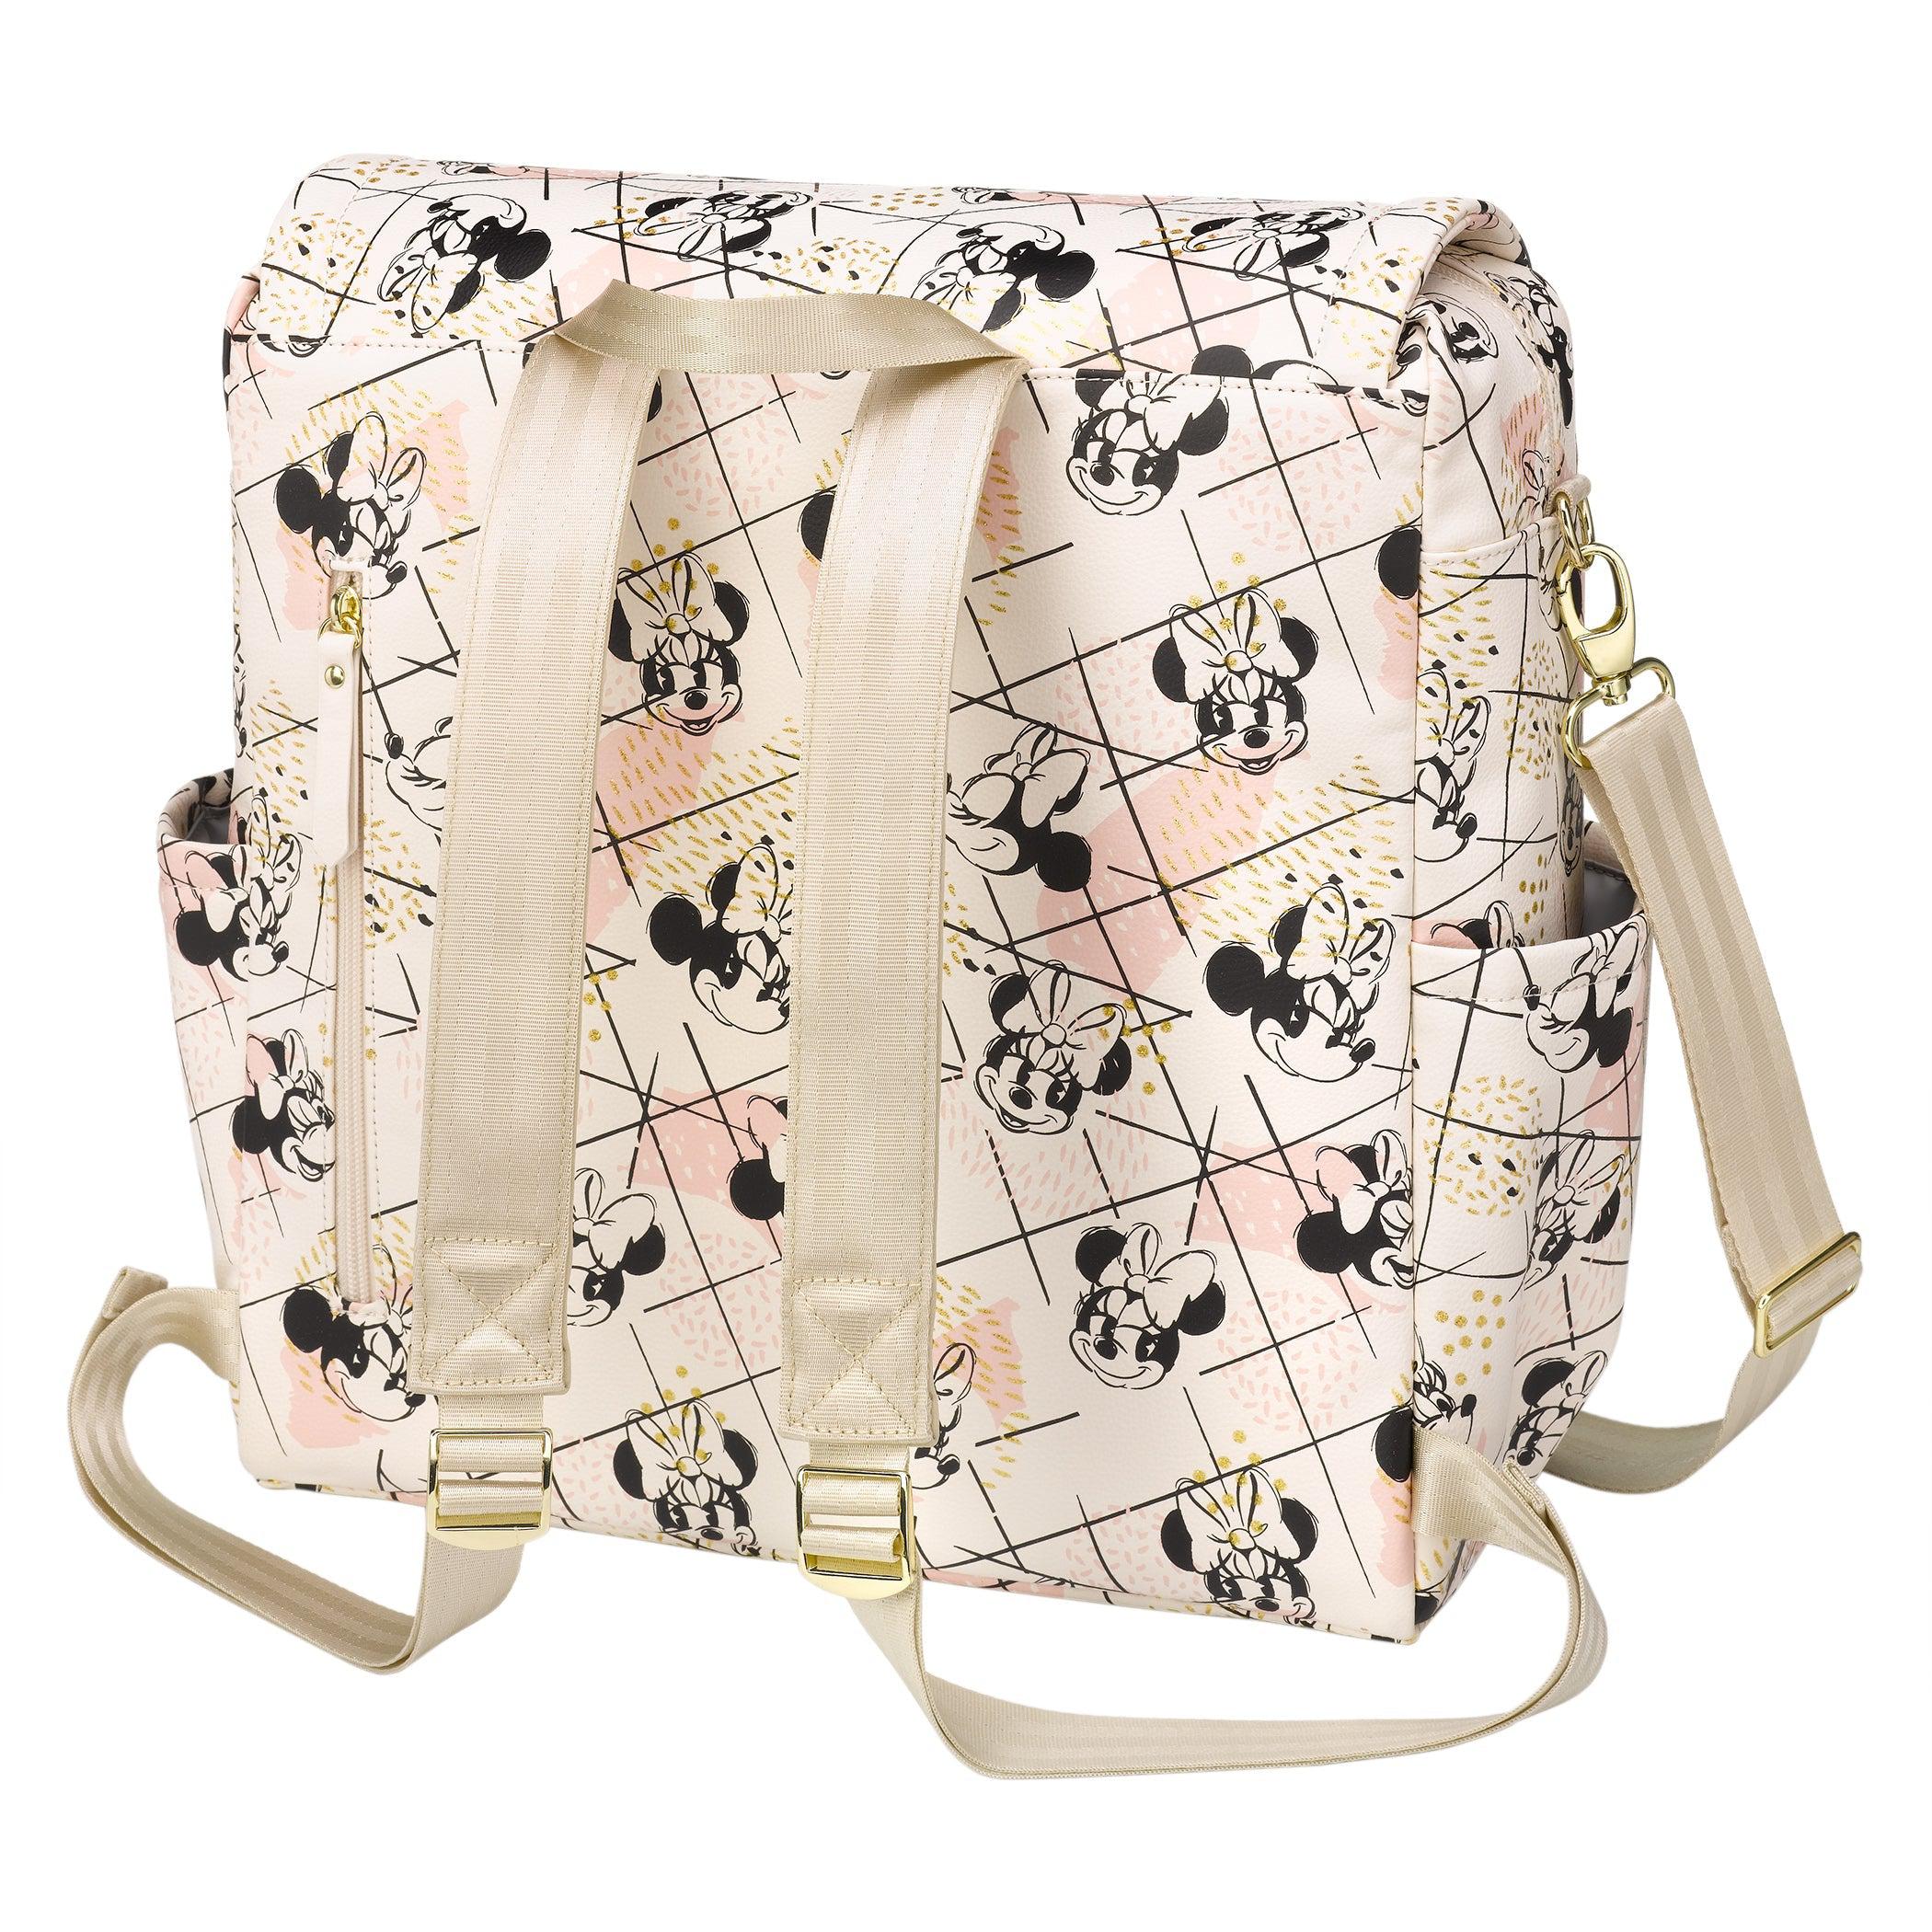 Petunia Pickle Bottom Boxy Backpack in Shimmery Minnie Mouse